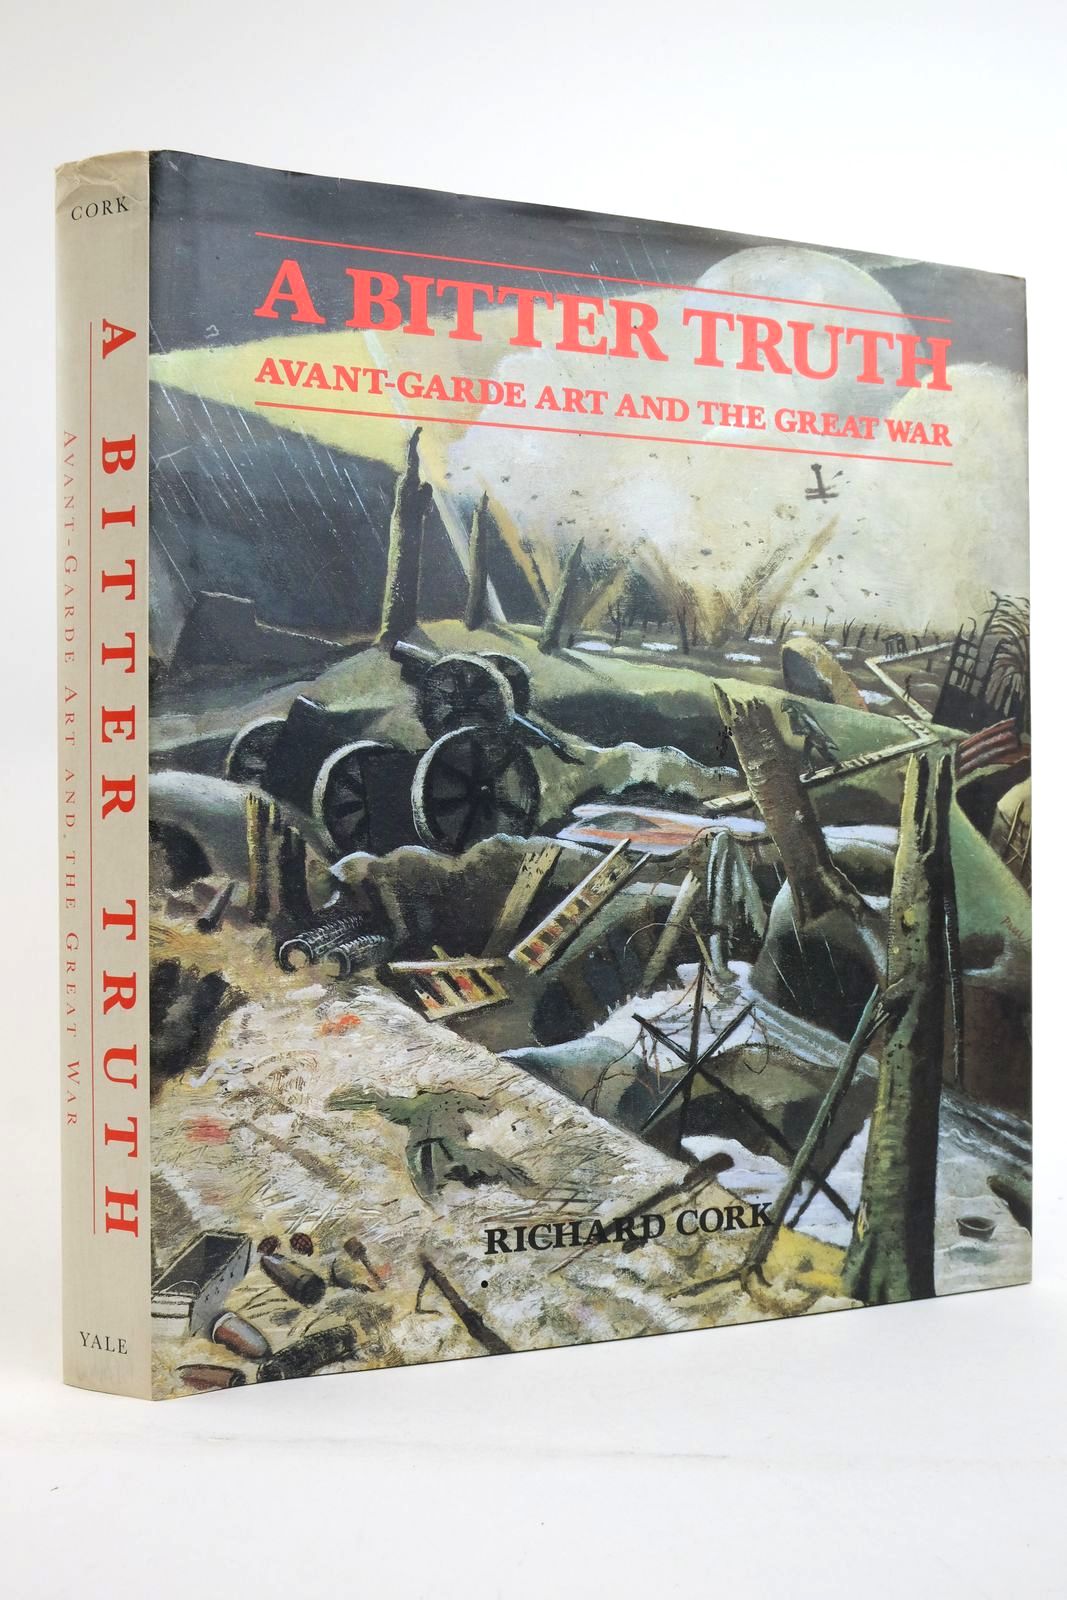 Photo of A BITTER TRUTH AVANT-GARDE ART AND THE GREAT WAR written by Cork, Richard published by Yale University Press (STOCK CODE: 2135727)  for sale by Stella & Rose's Books